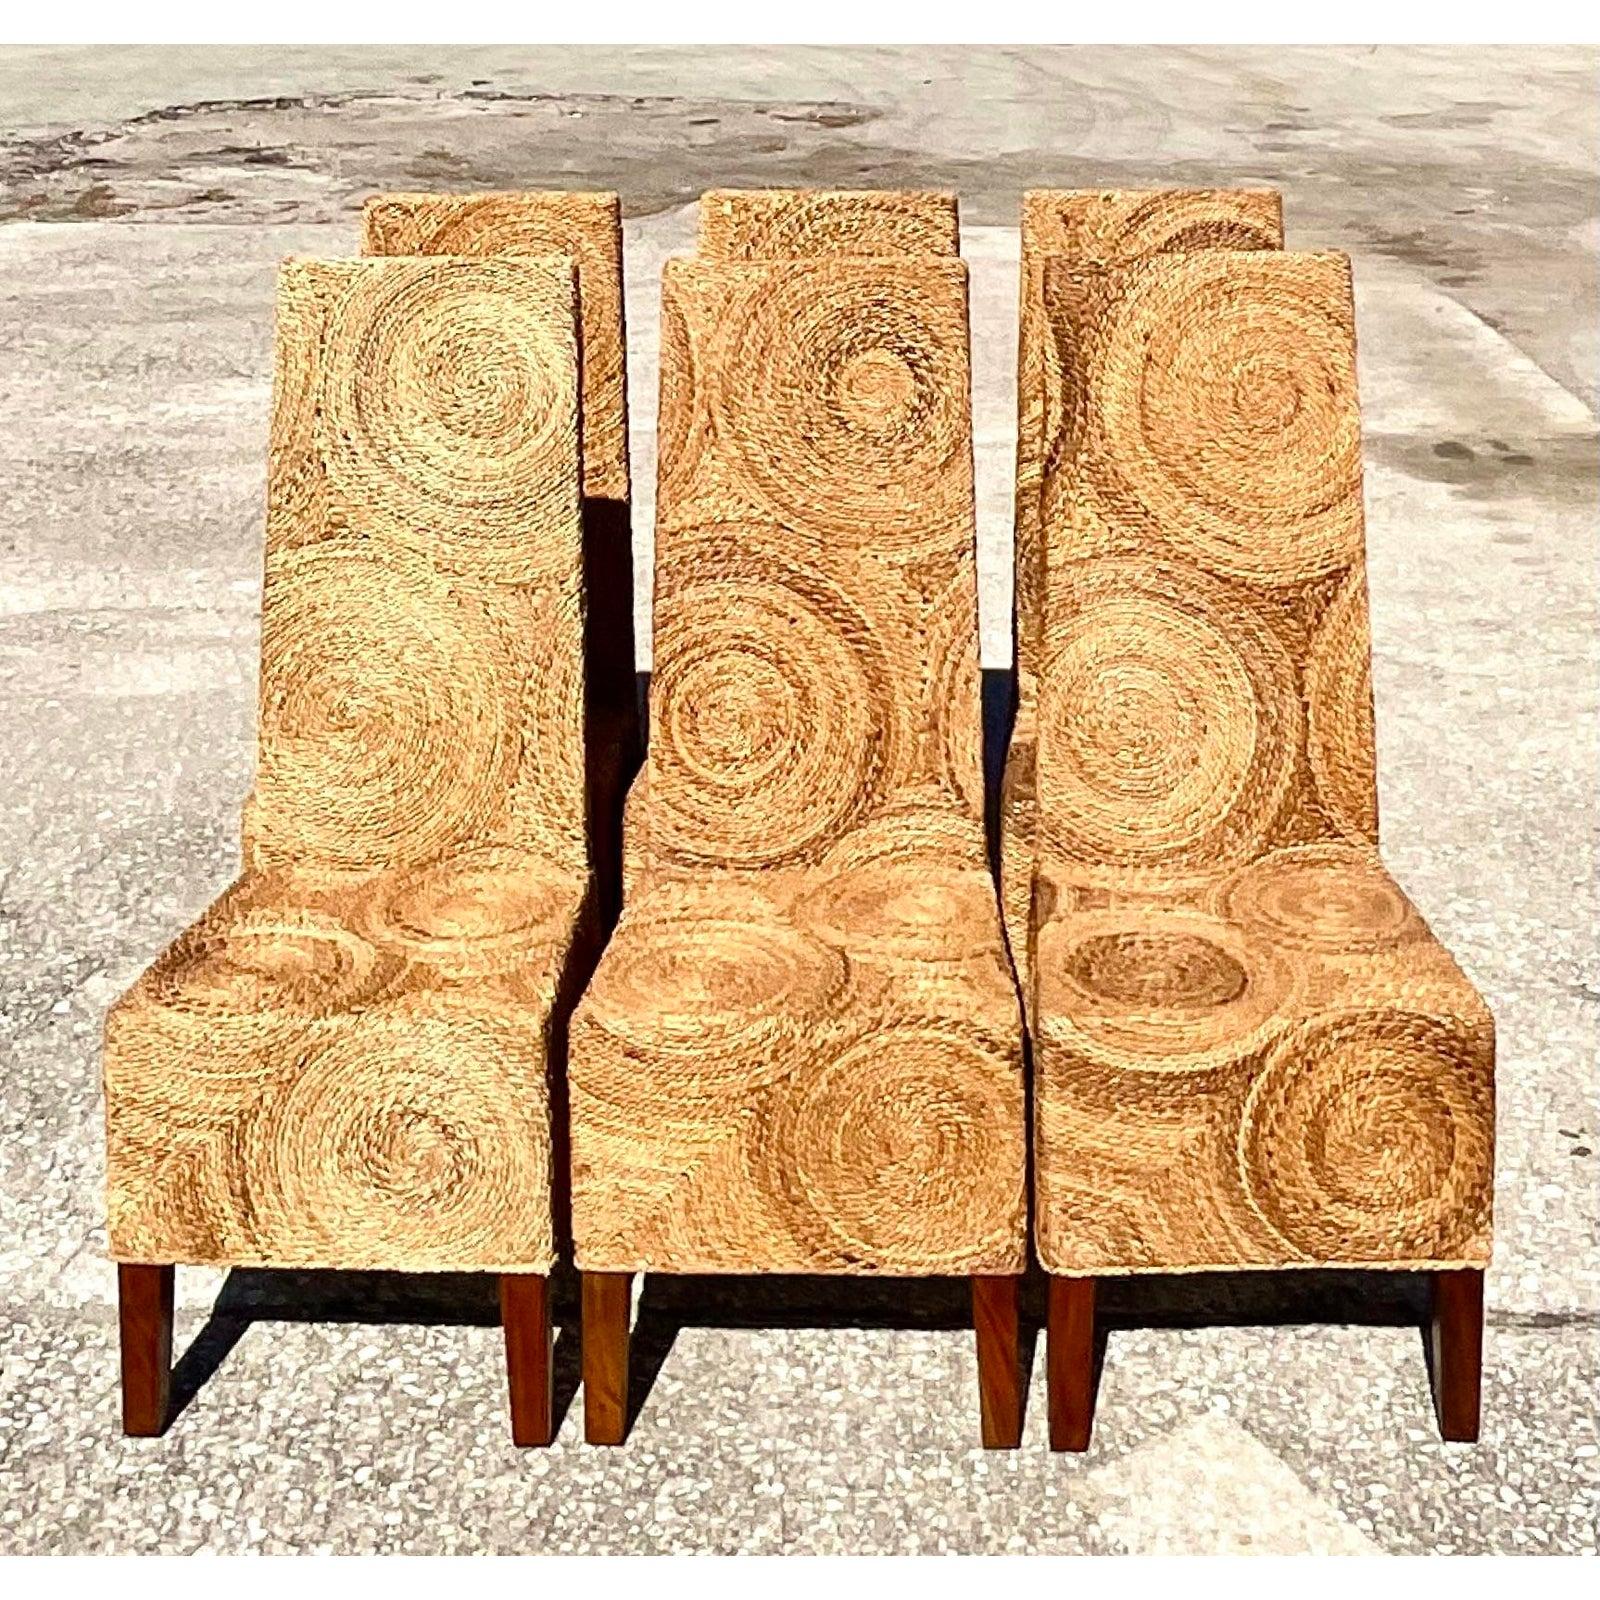 Vintage Coastal Twisted Rattan Circles Dining Chairs - Set of 6 For Sale 2